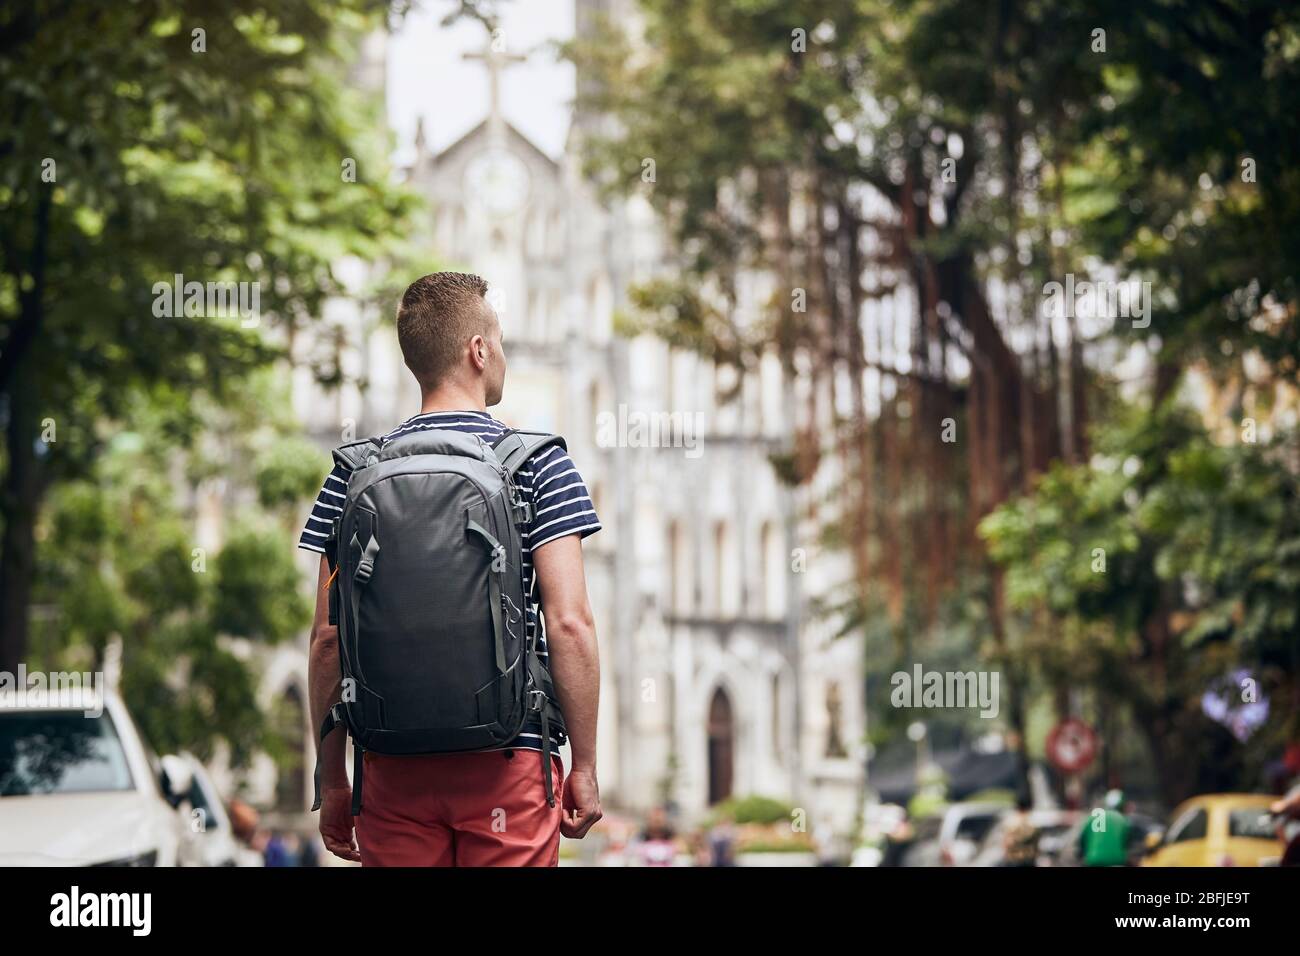 Traveler walking on street against cathedral. Rear view of young man with backpack in Hanoi, Vietnam. Stock Photo